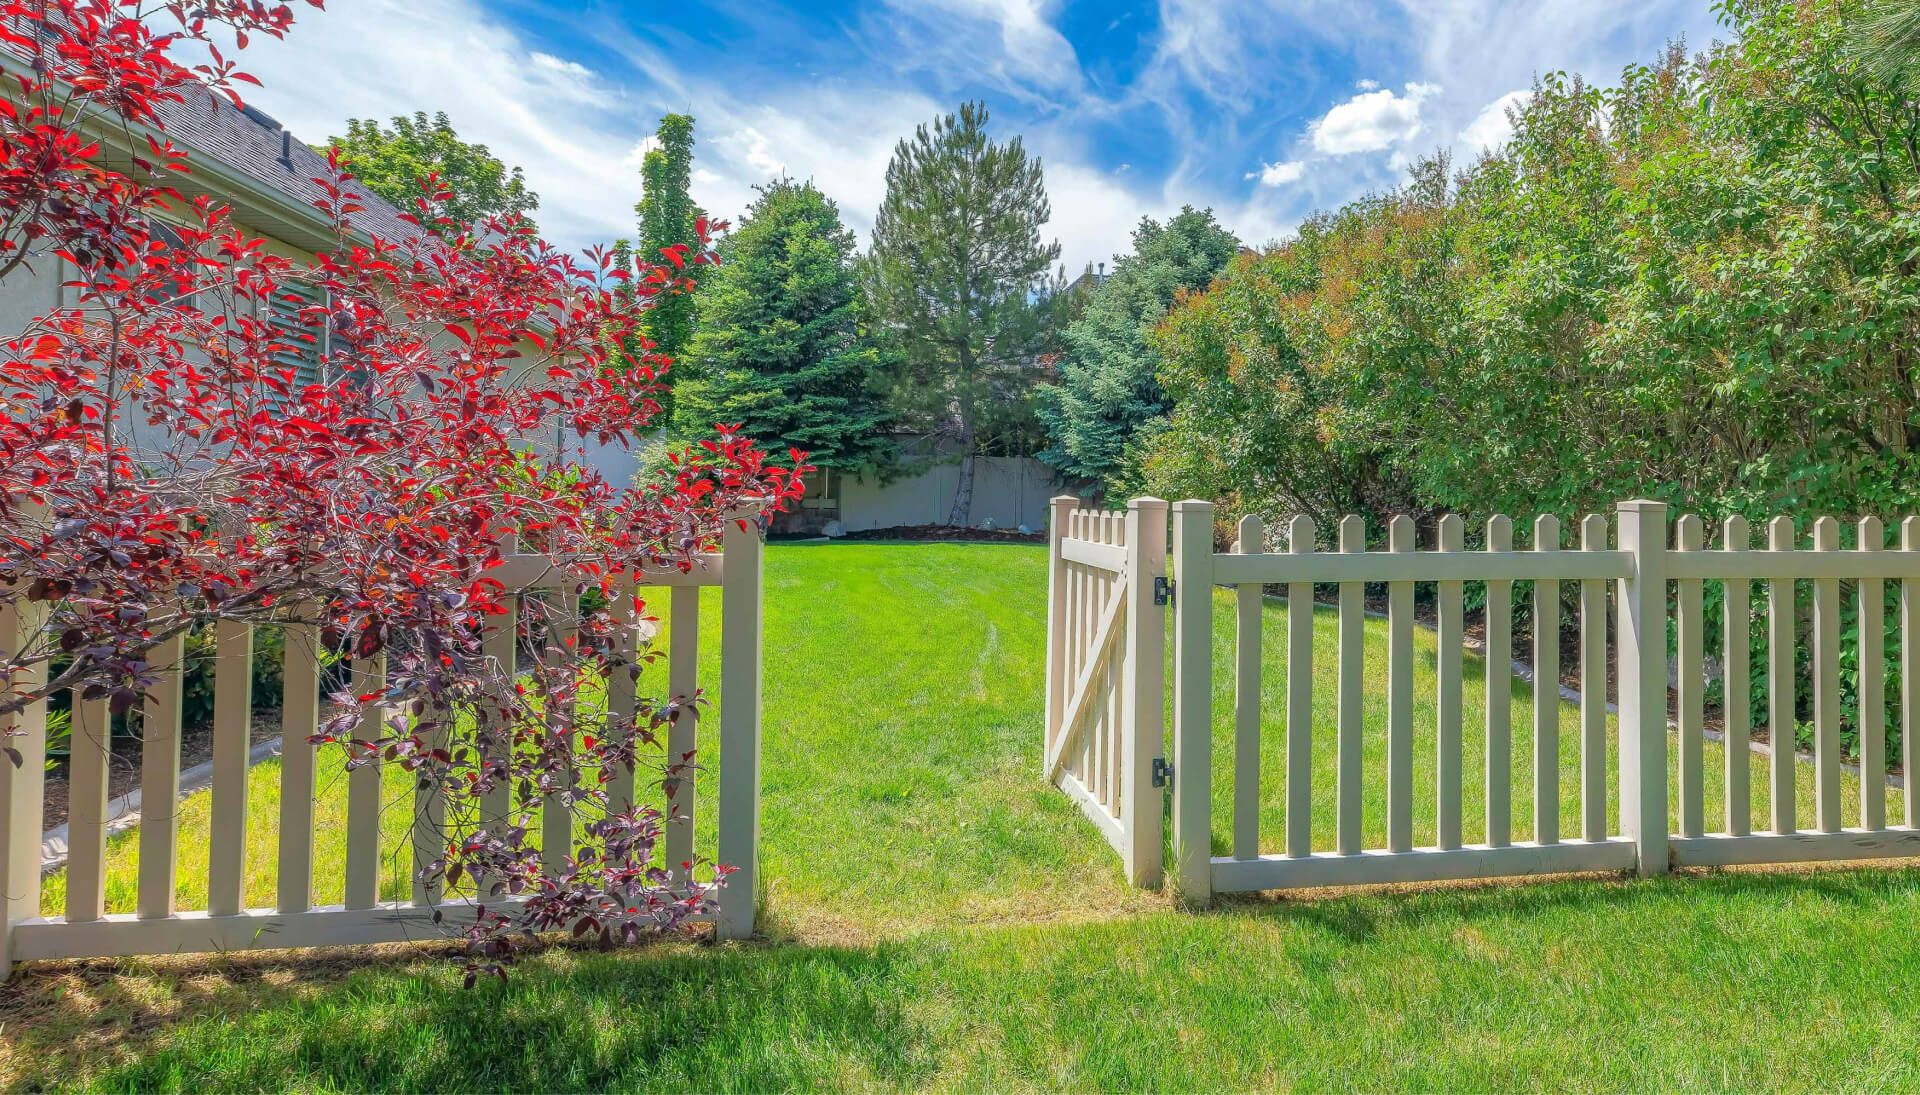 A functional fence gate providing access to a well-maintained backyard, surrounded by a wooden fence in Cumming